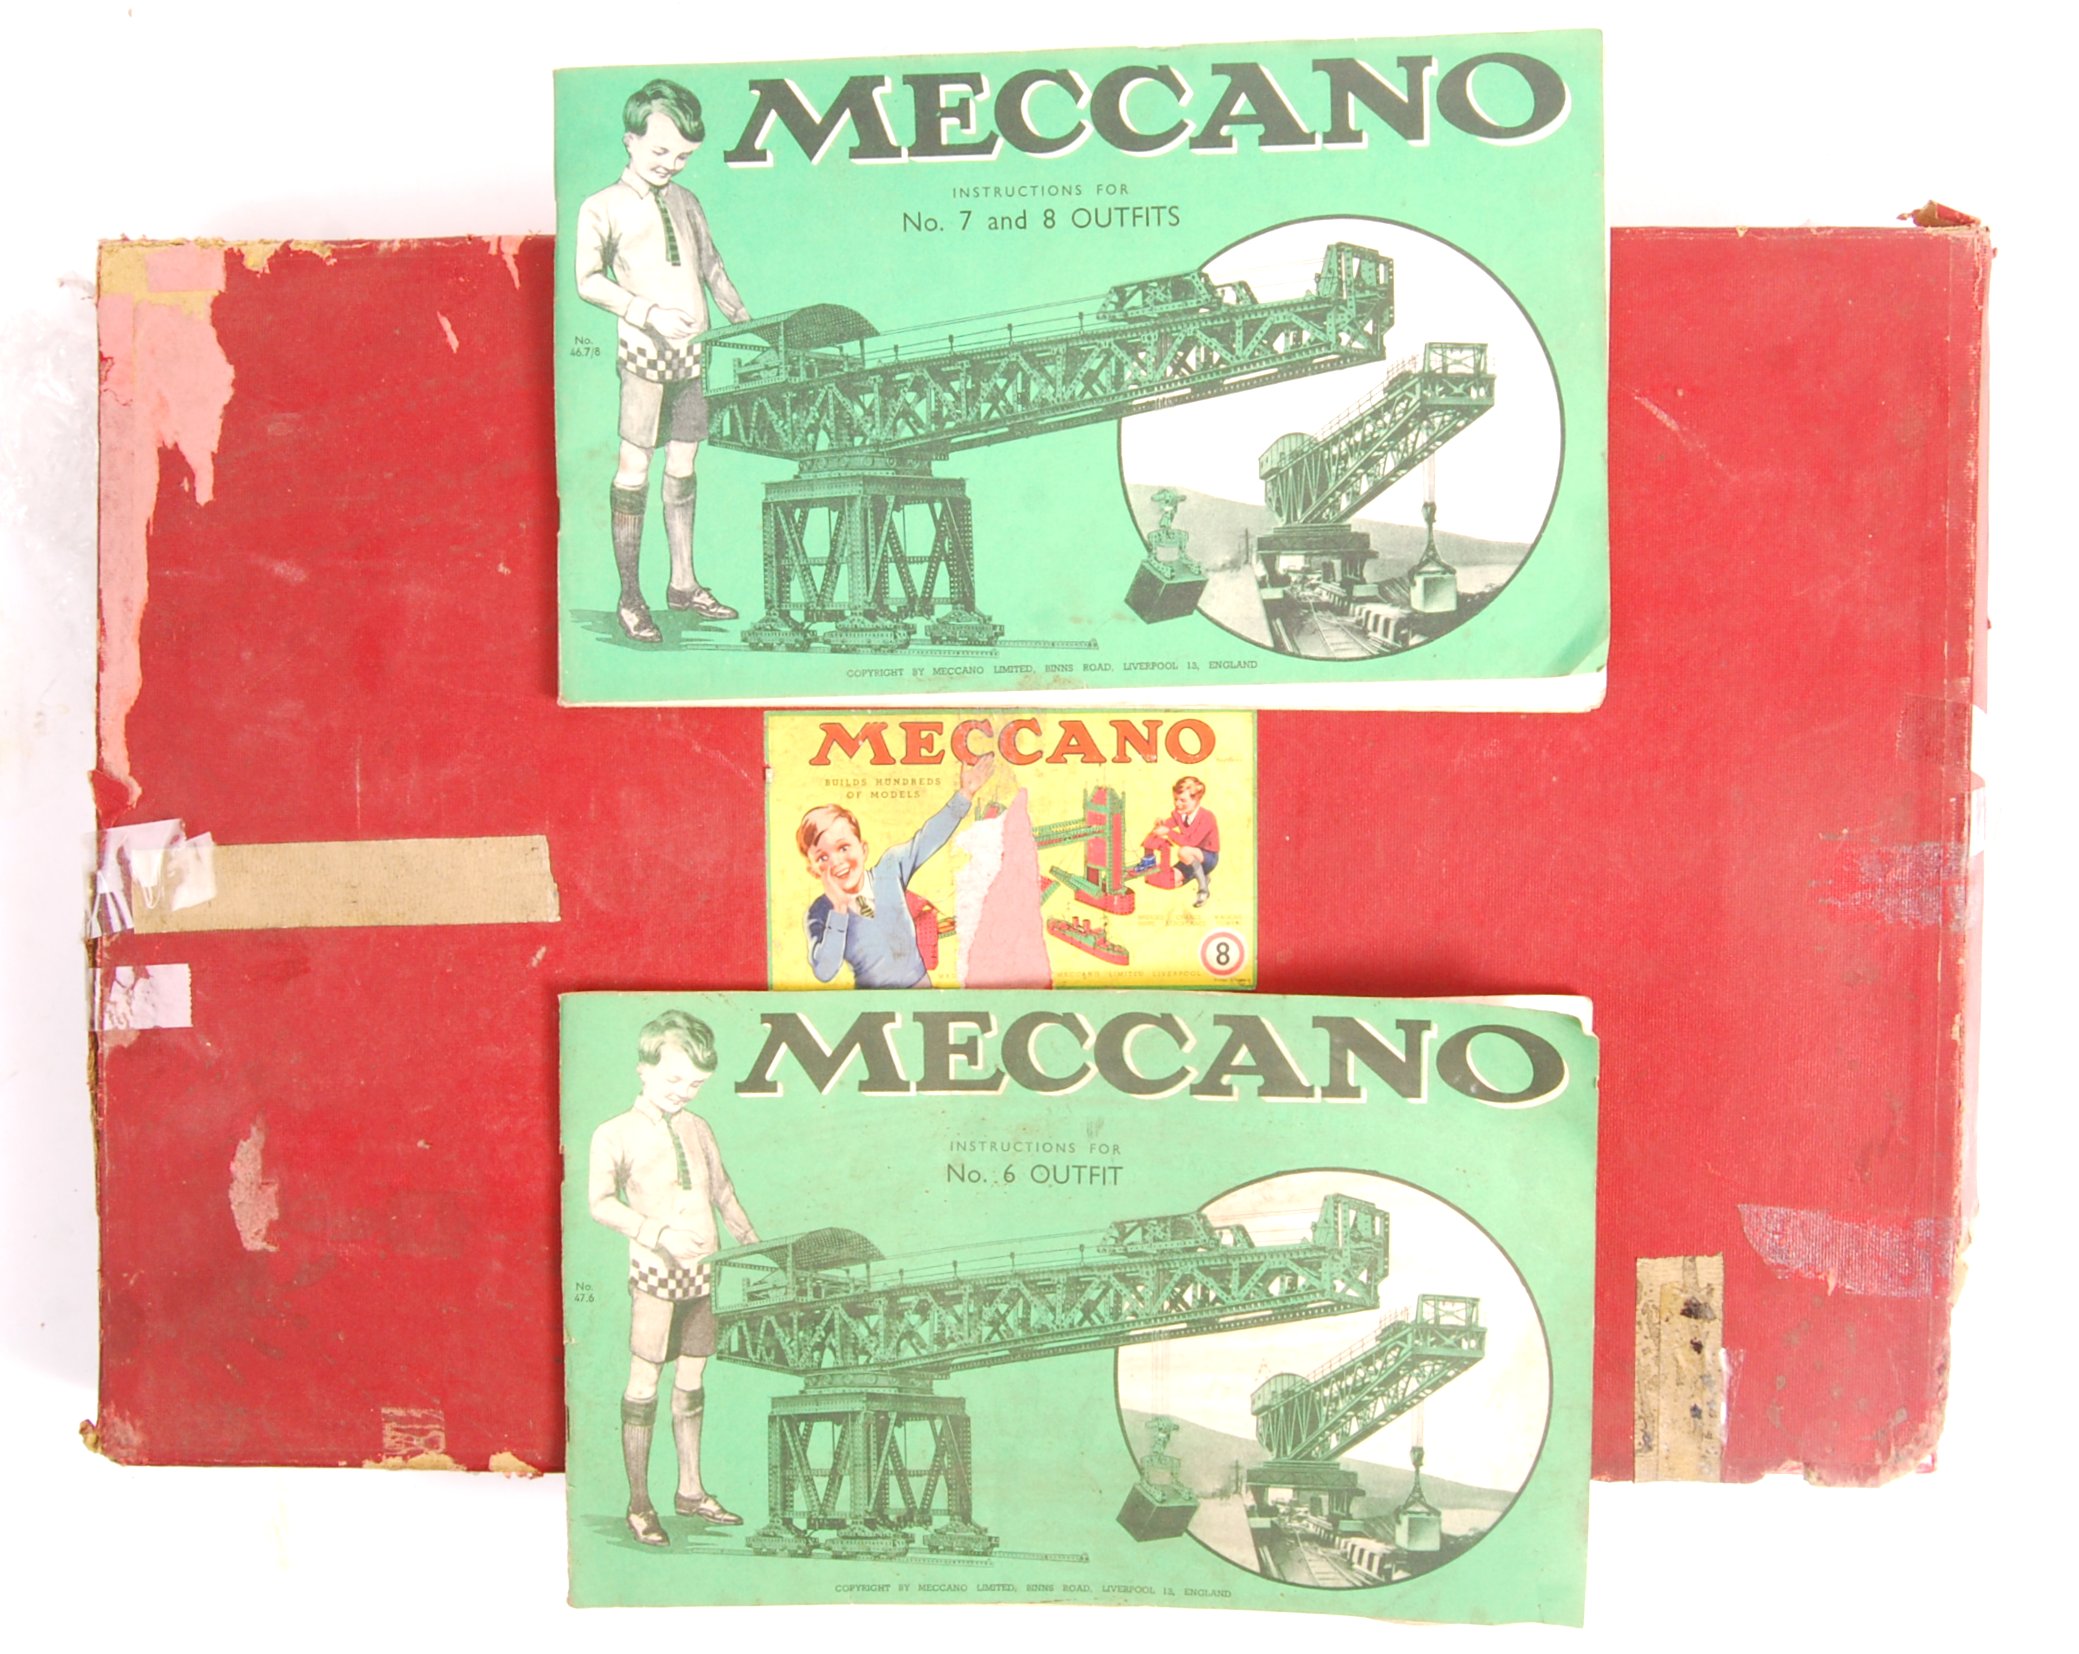 ORIGINAL MECCANO SET OUTFIT 8 WITHIN BOX - Image 3 of 3